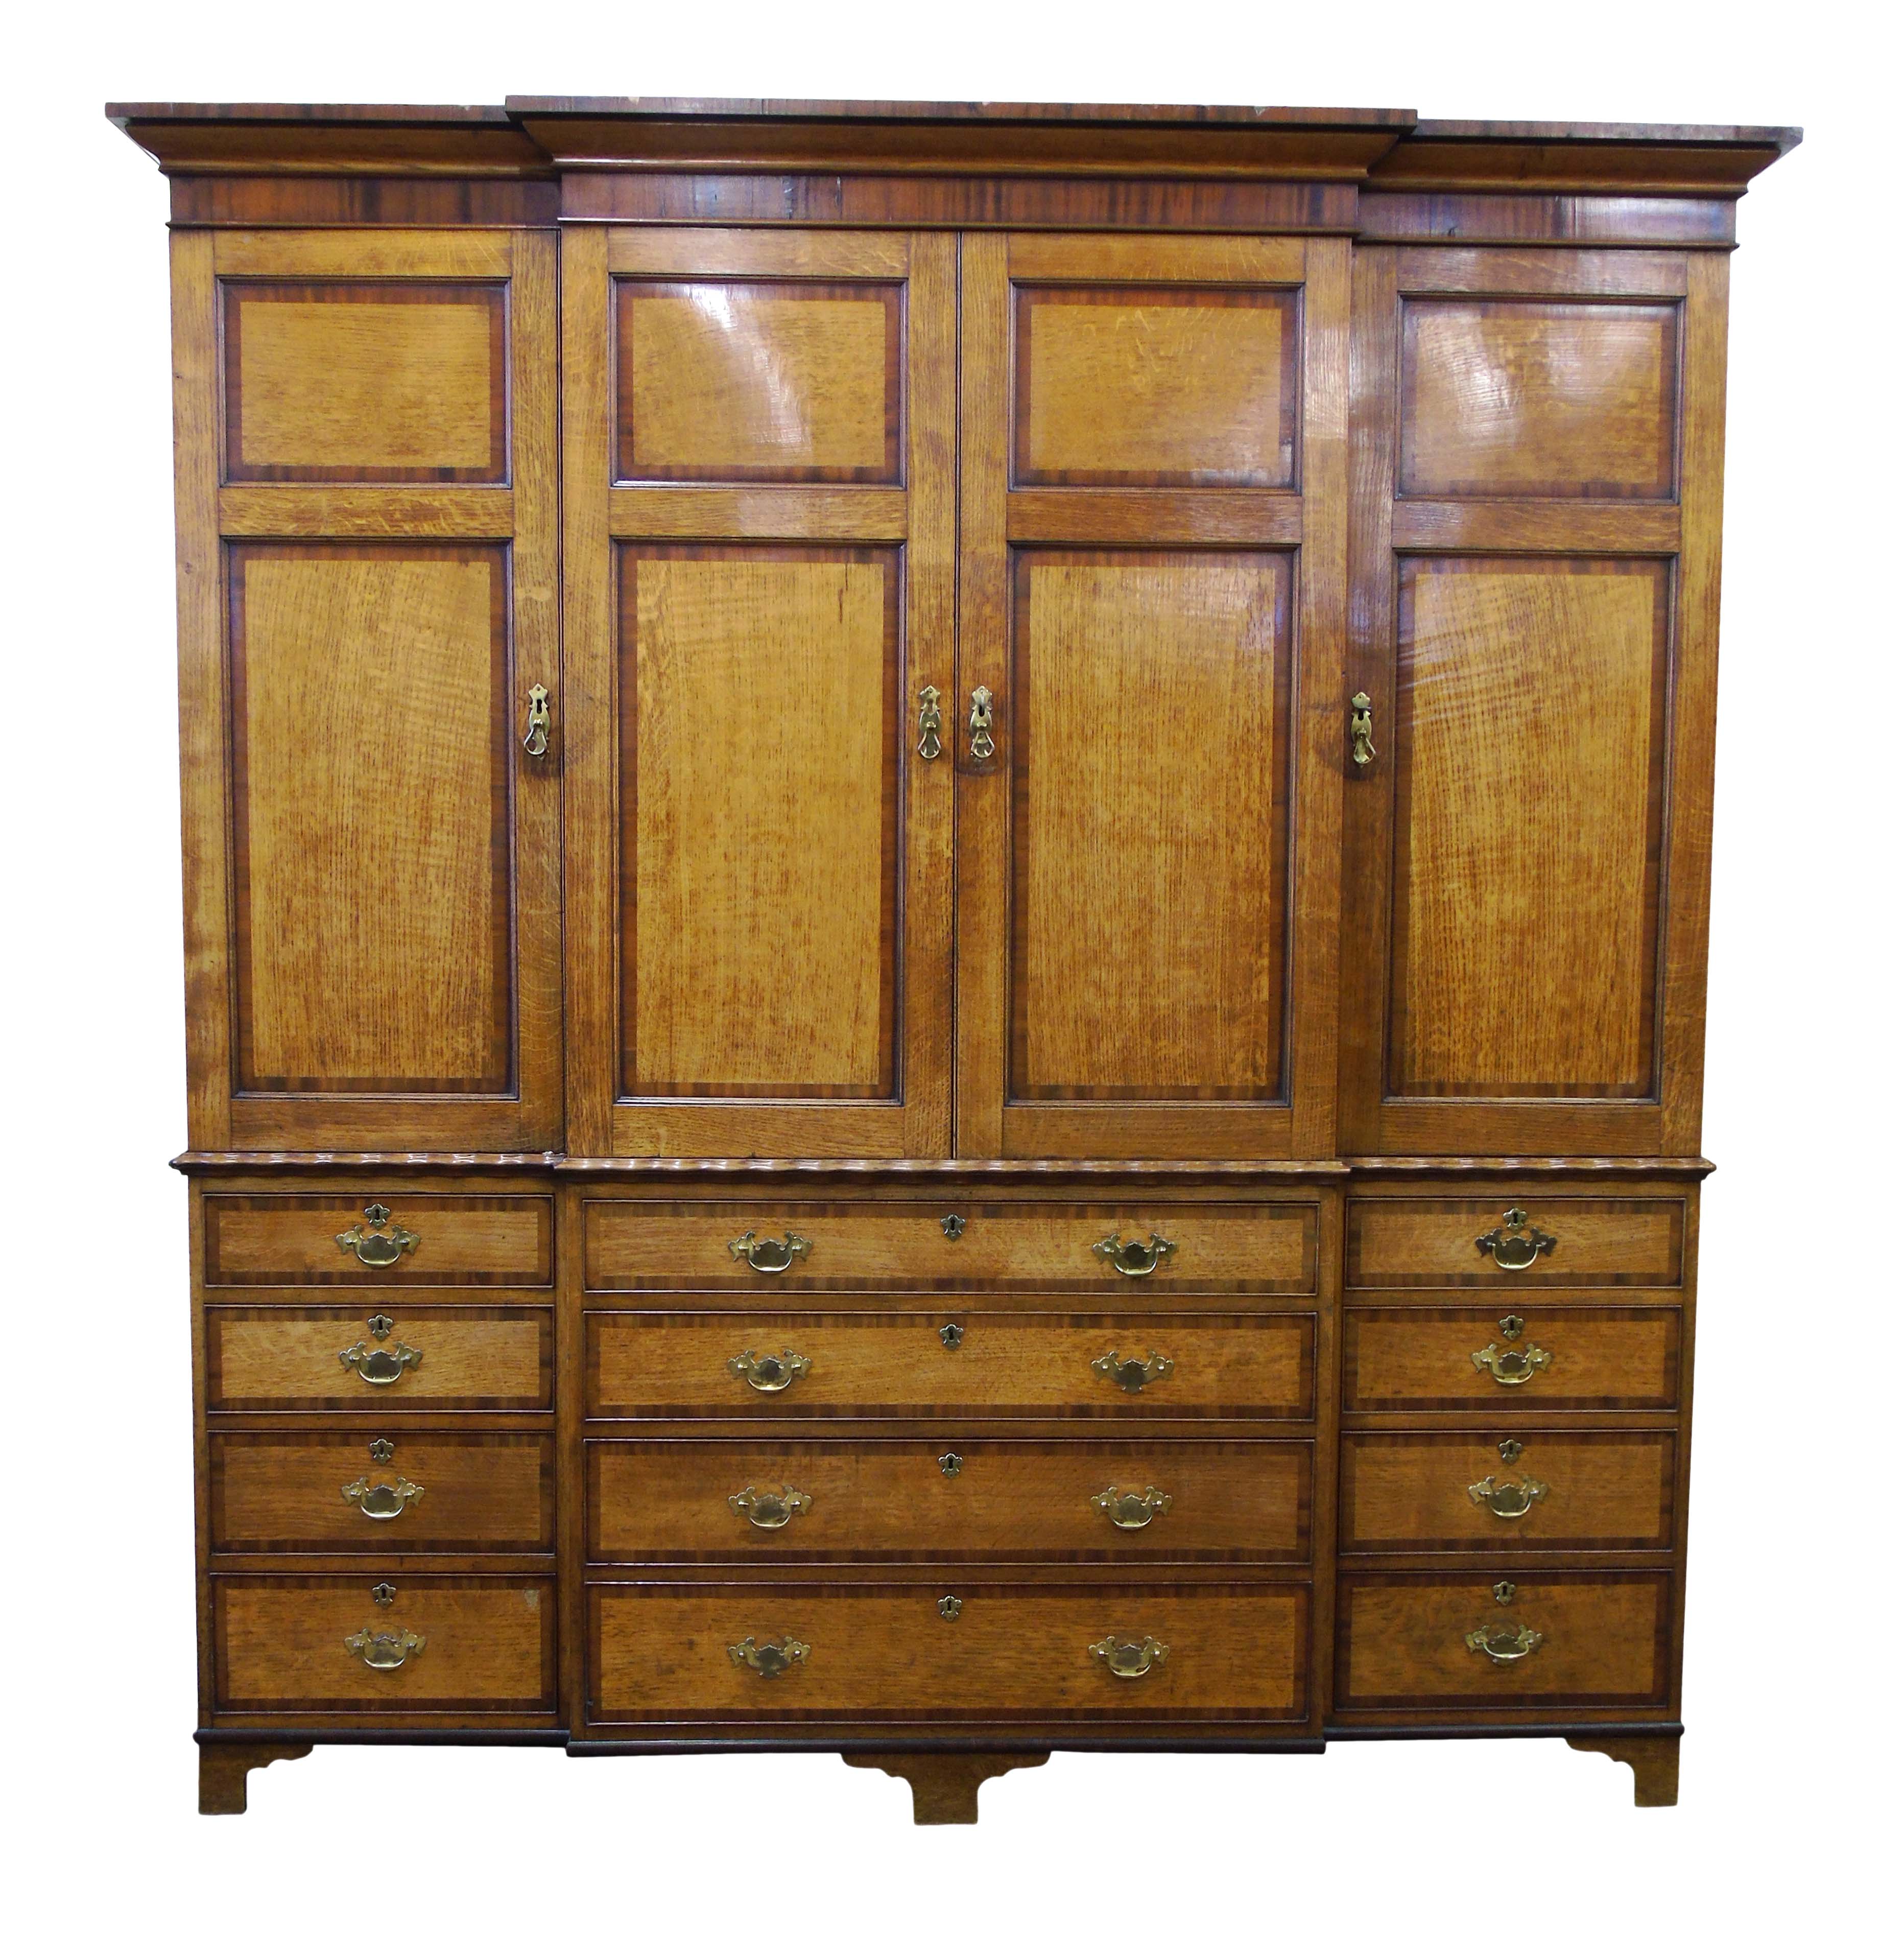 Early 19th century oak and mahogany veneered breakfront housekeepers cupboard, ogee cornice above four two panel doors, interior with fixed shelves (right hand cupboard with two short drawers), base with wavy moulding, range of four long and eight short drawers, each with brass handles, all standing on bracket feet, width 211cm (83"), depth 56cm (22"), height 231cm (91").